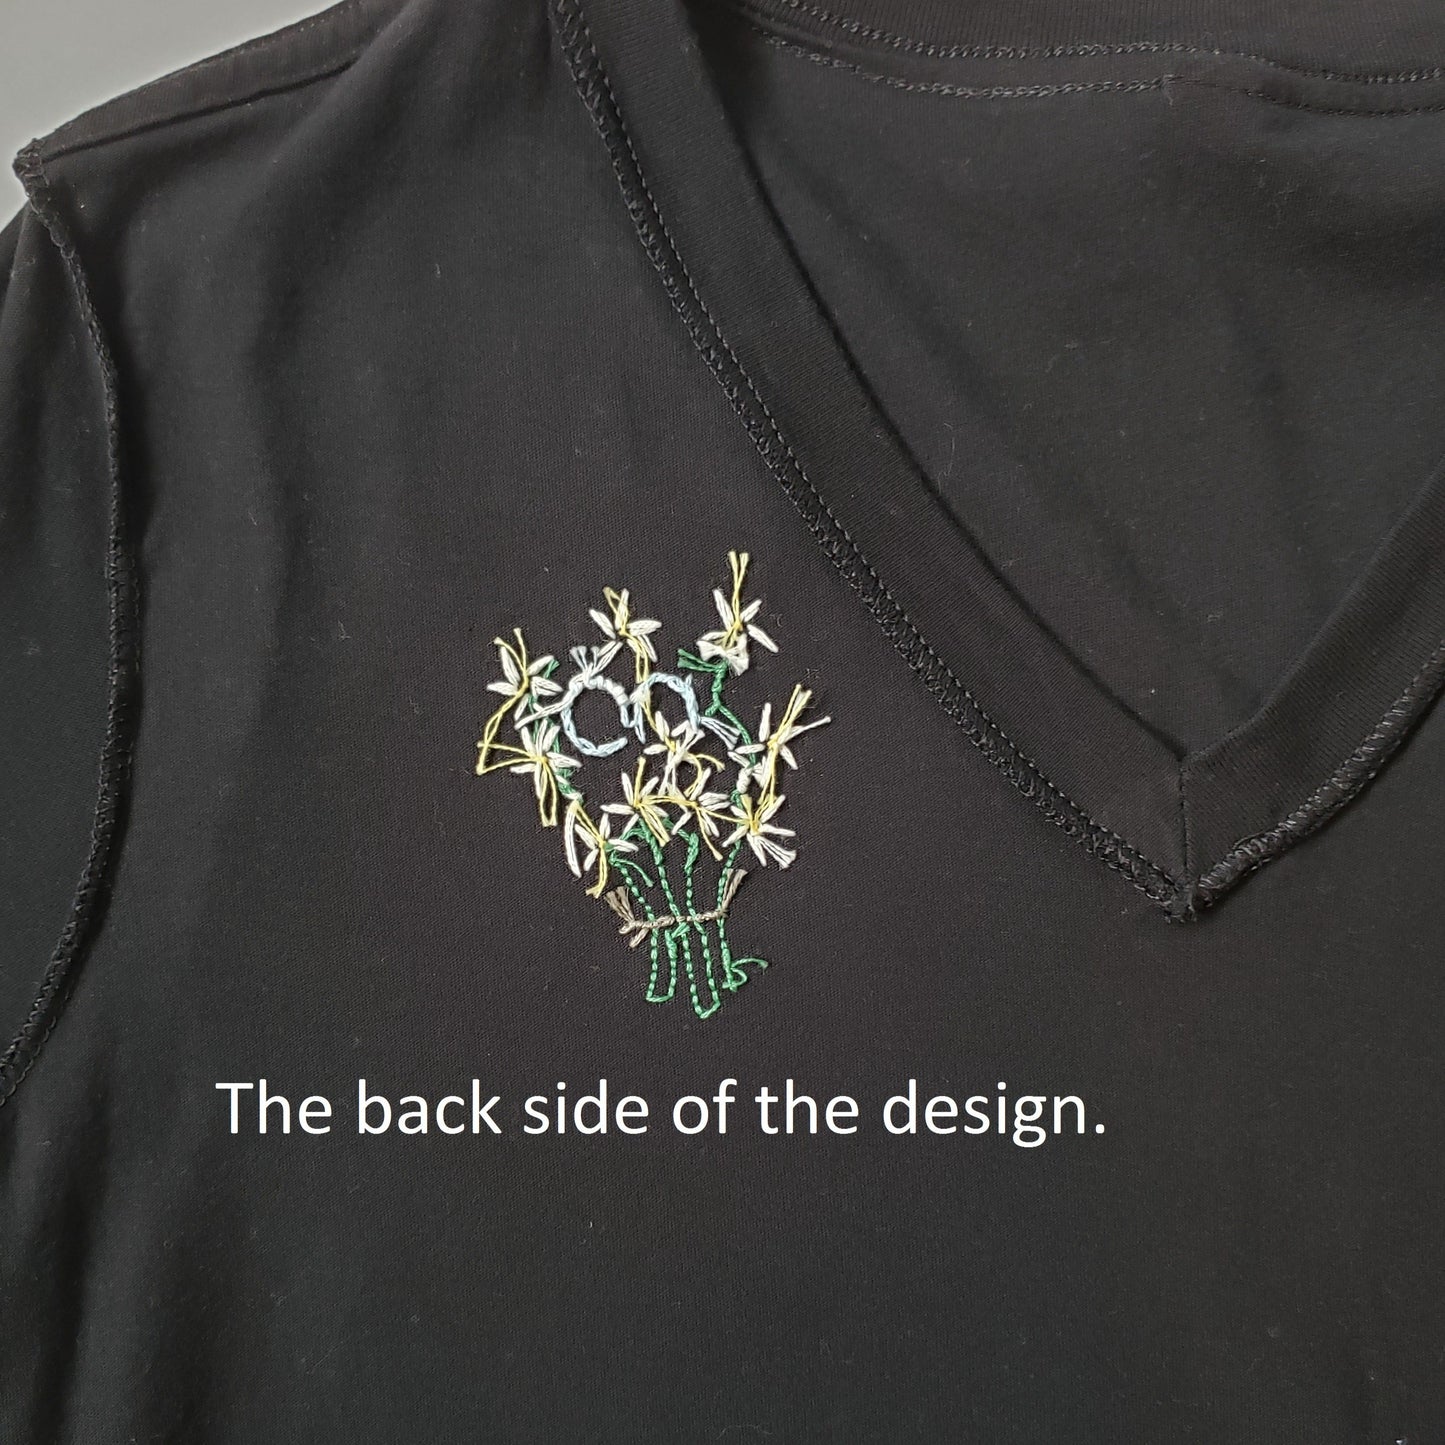 The back side of the design. You can see it looks tidy overall, but it's somewhat hard to discern what's what since the flowers do make a more abstract design from this side.